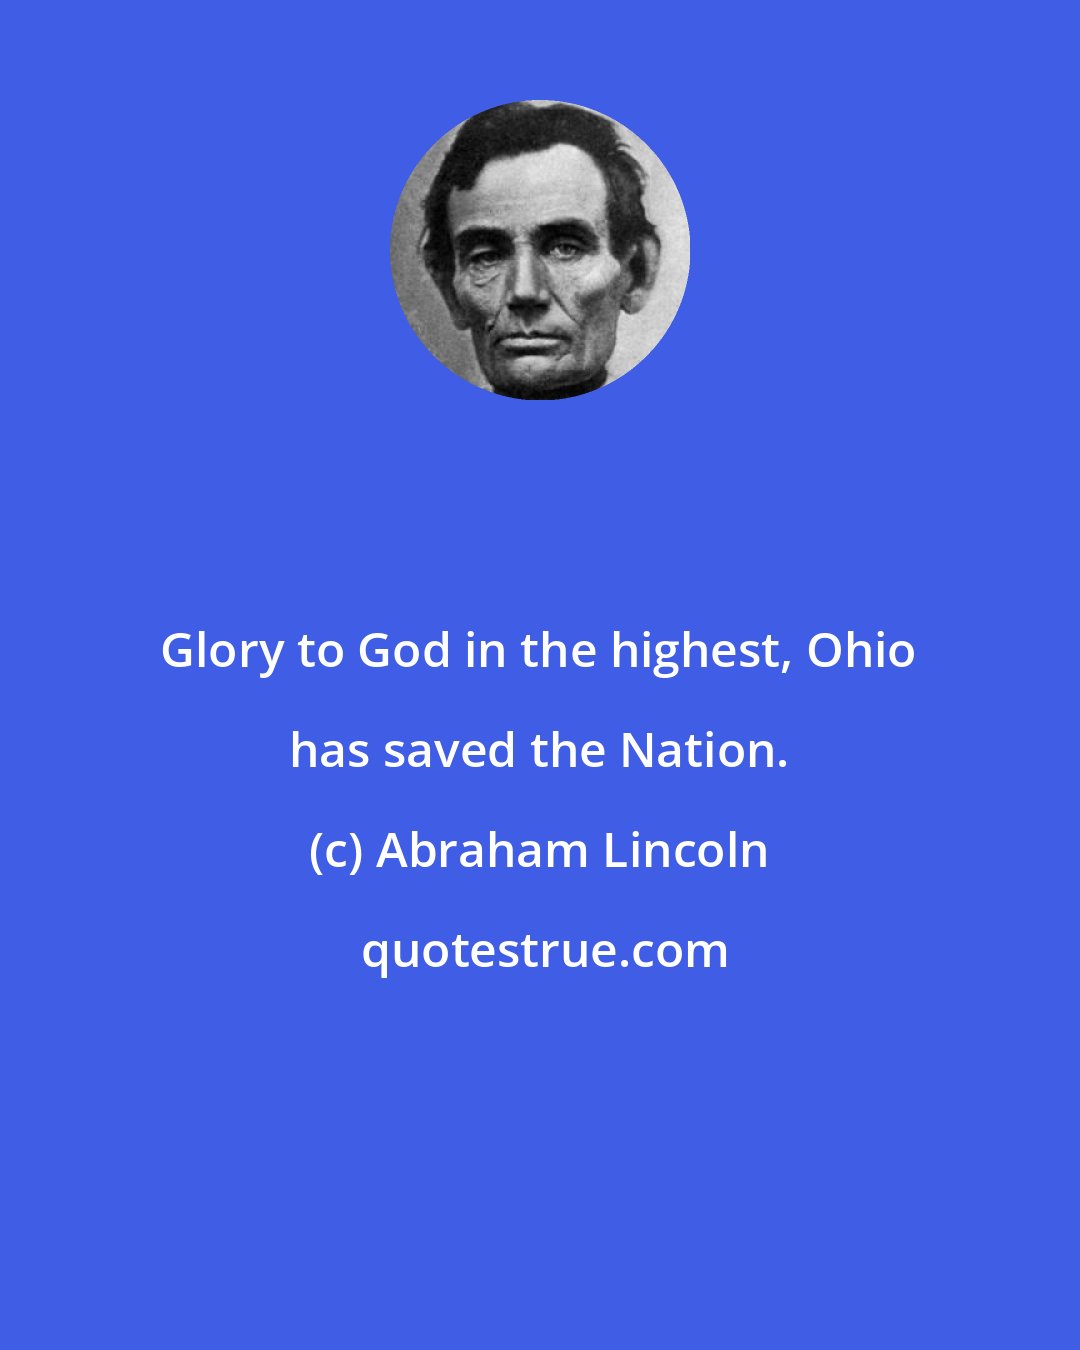 Abraham Lincoln: Glory to God in the highest, Ohio has saved the Nation.